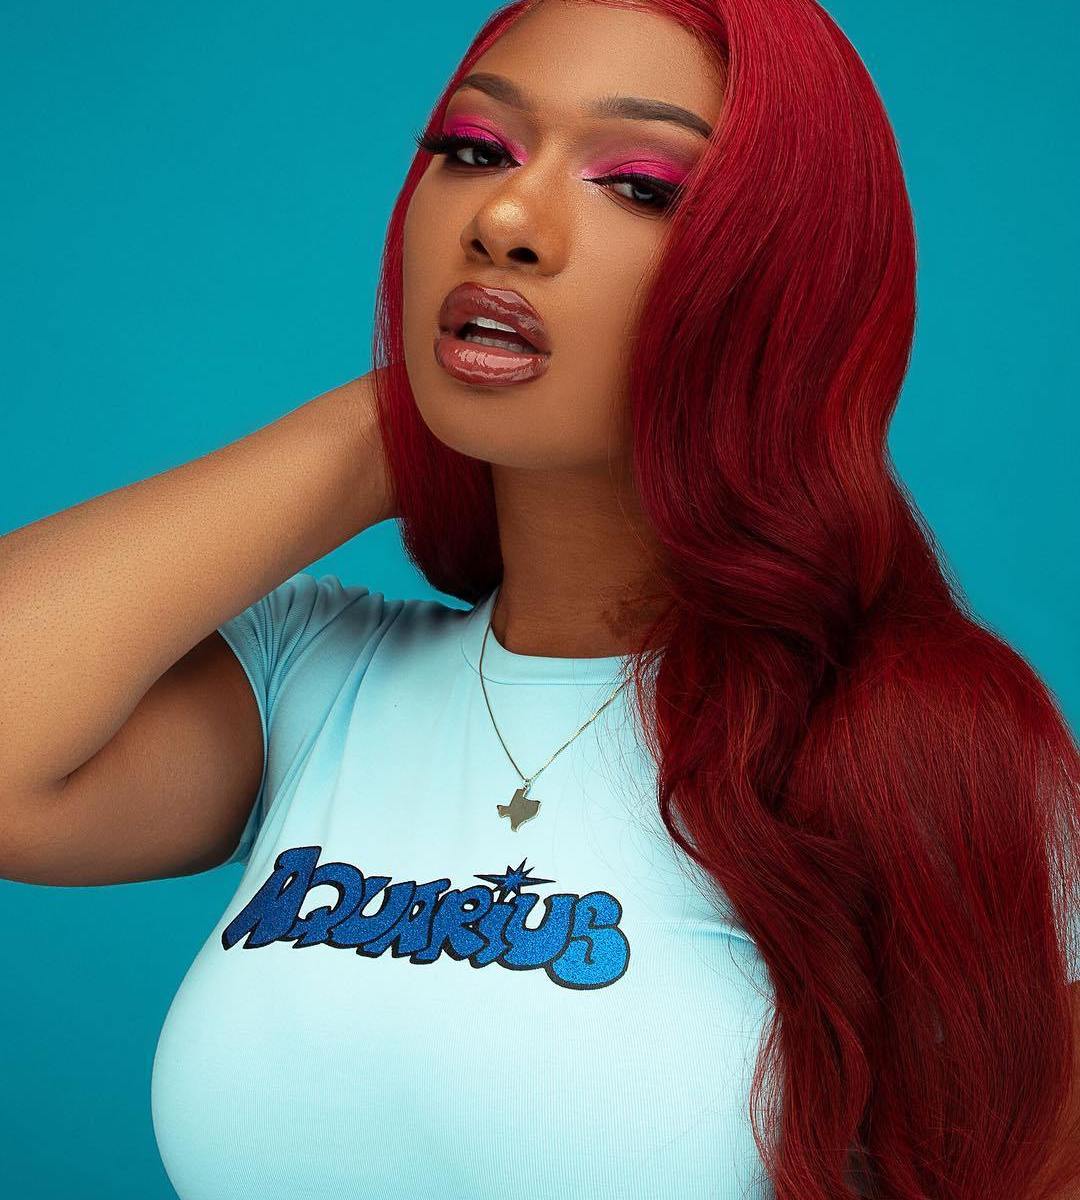 Exclusive First Look At The Crunchyroll X Megan Thee Stallion